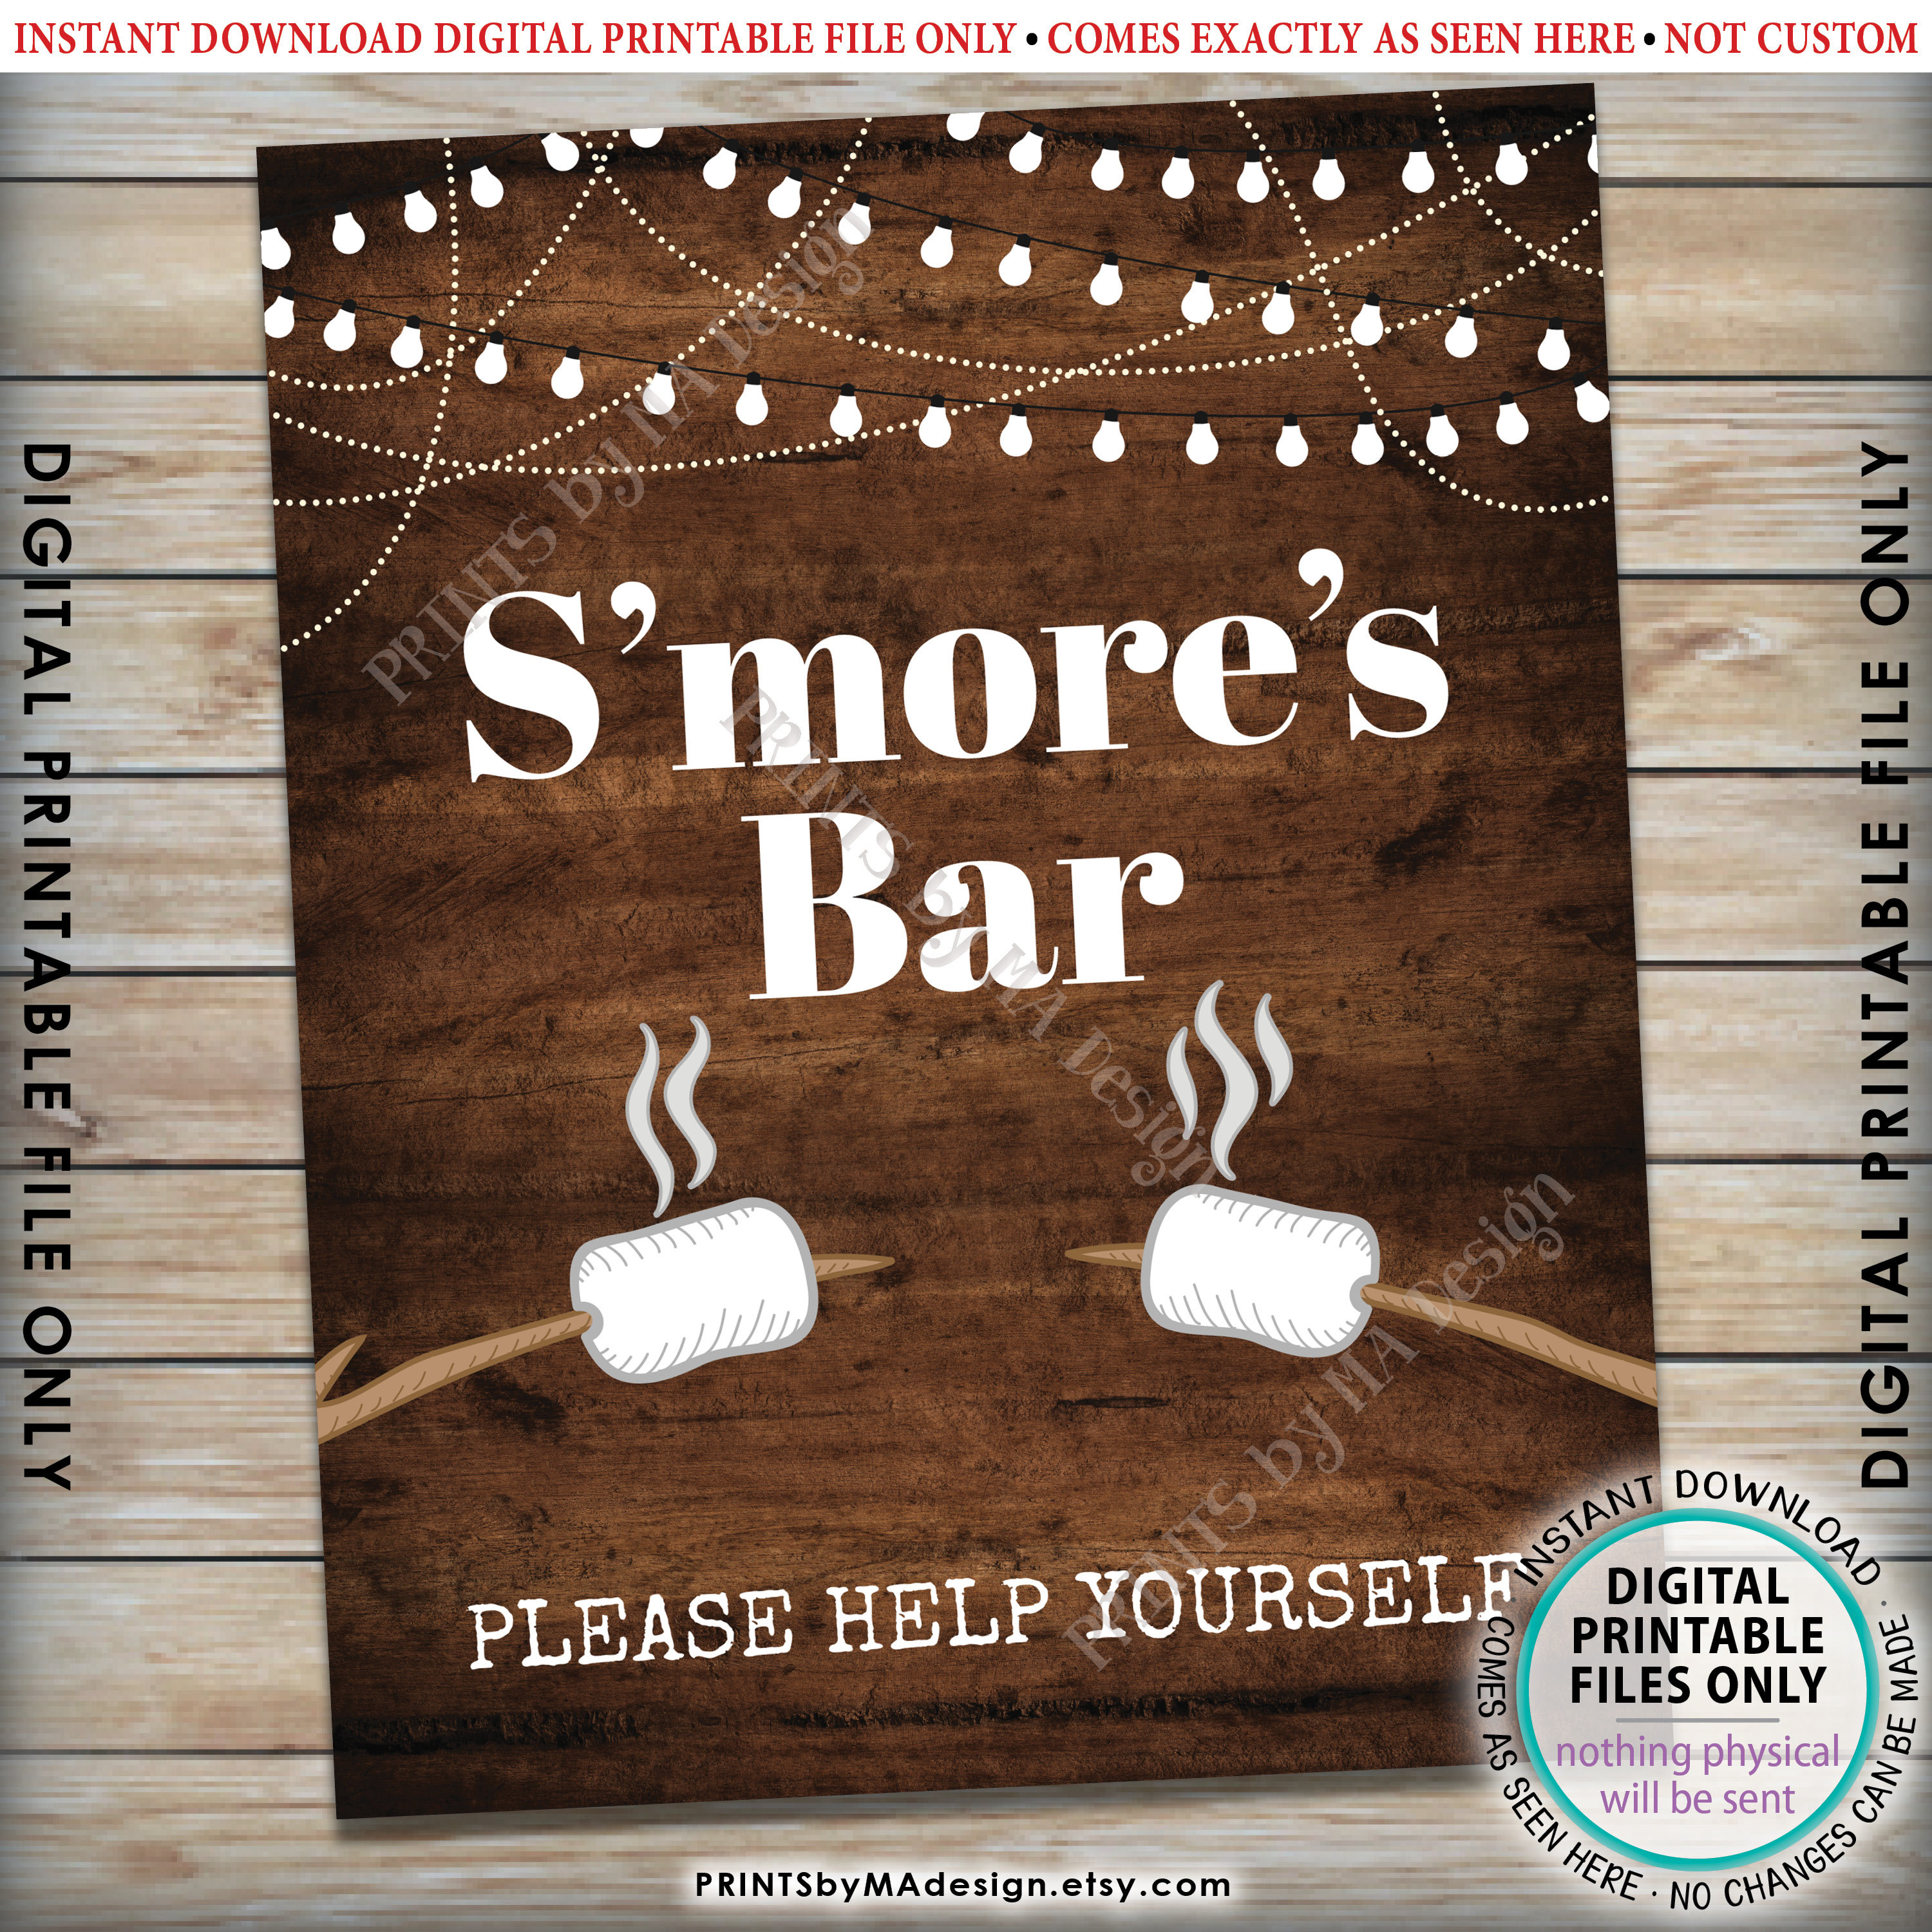 s-mores-bar-sign-please-help-yourself-to-the-smore-station-roast